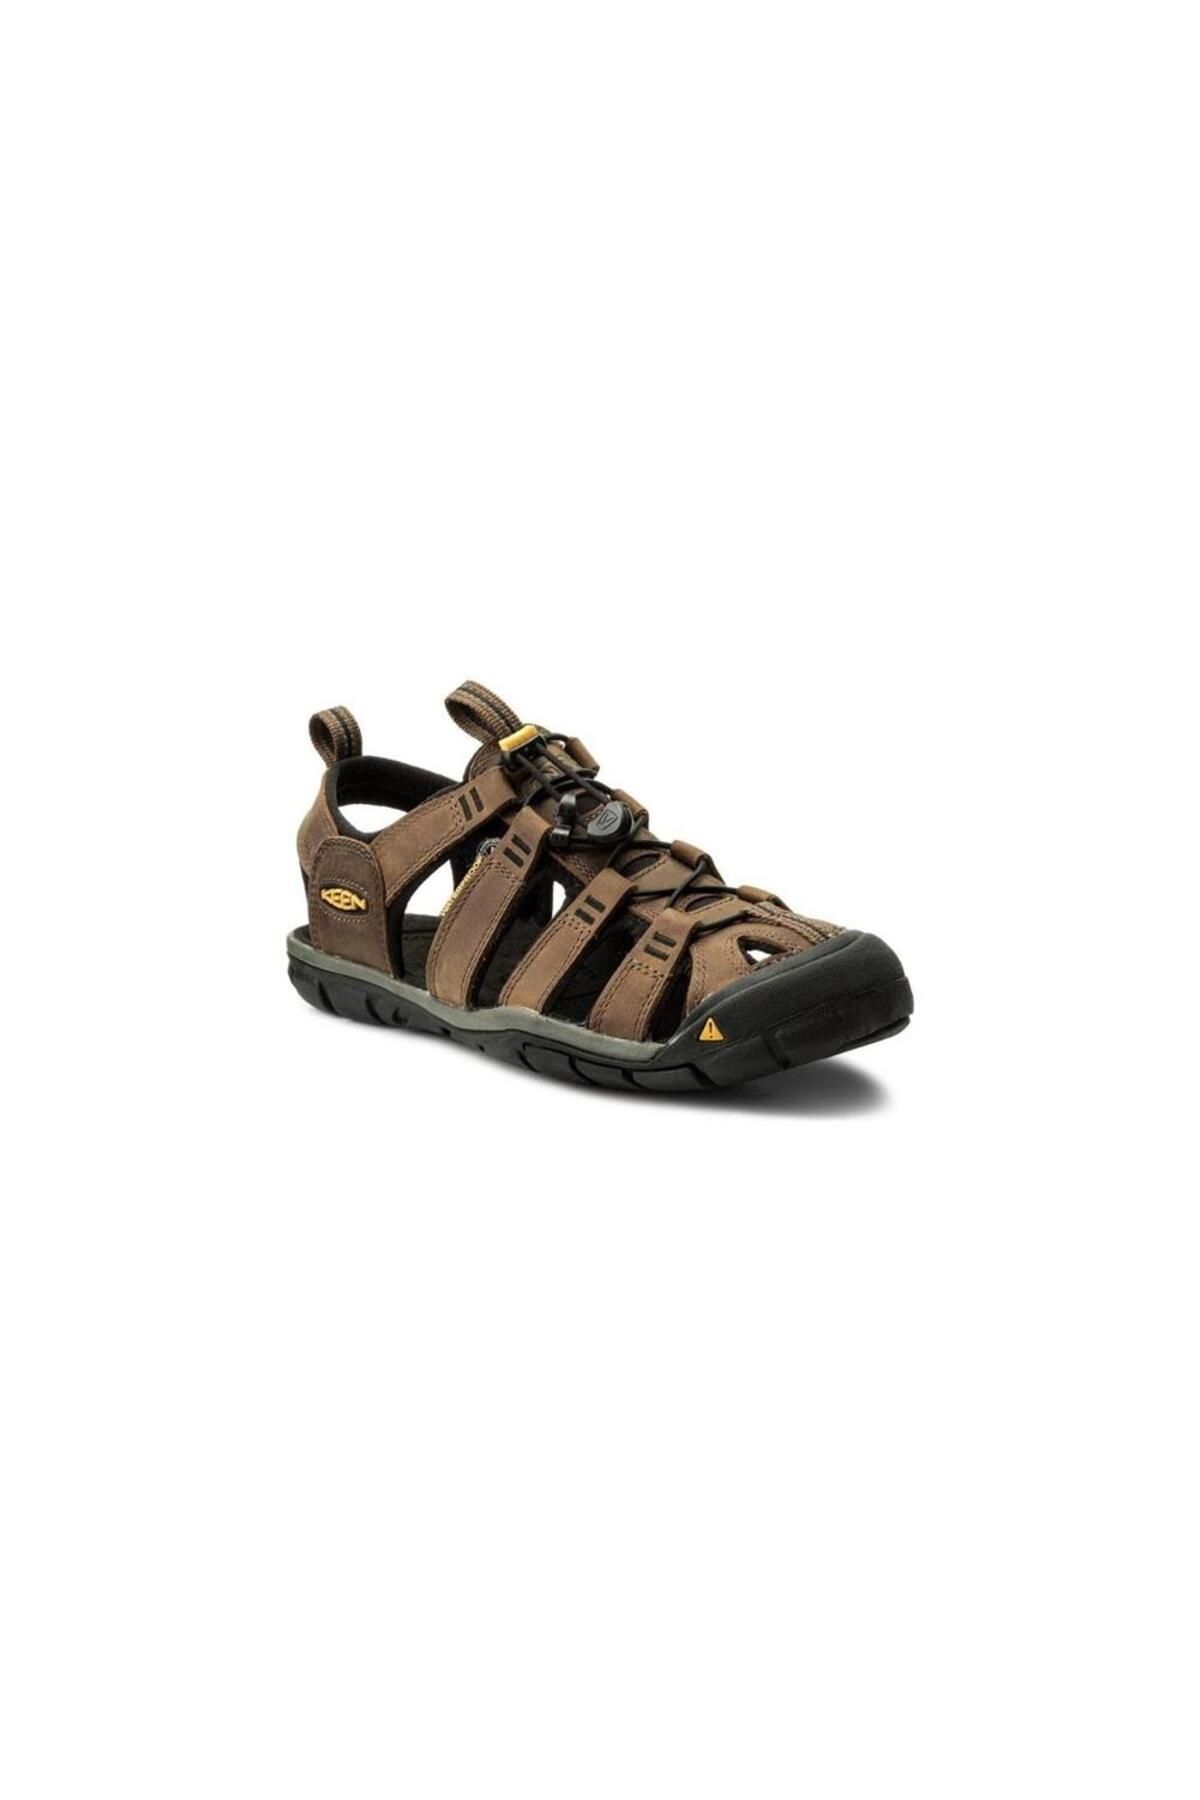 Keen CLEARWATER CNX LEATHER